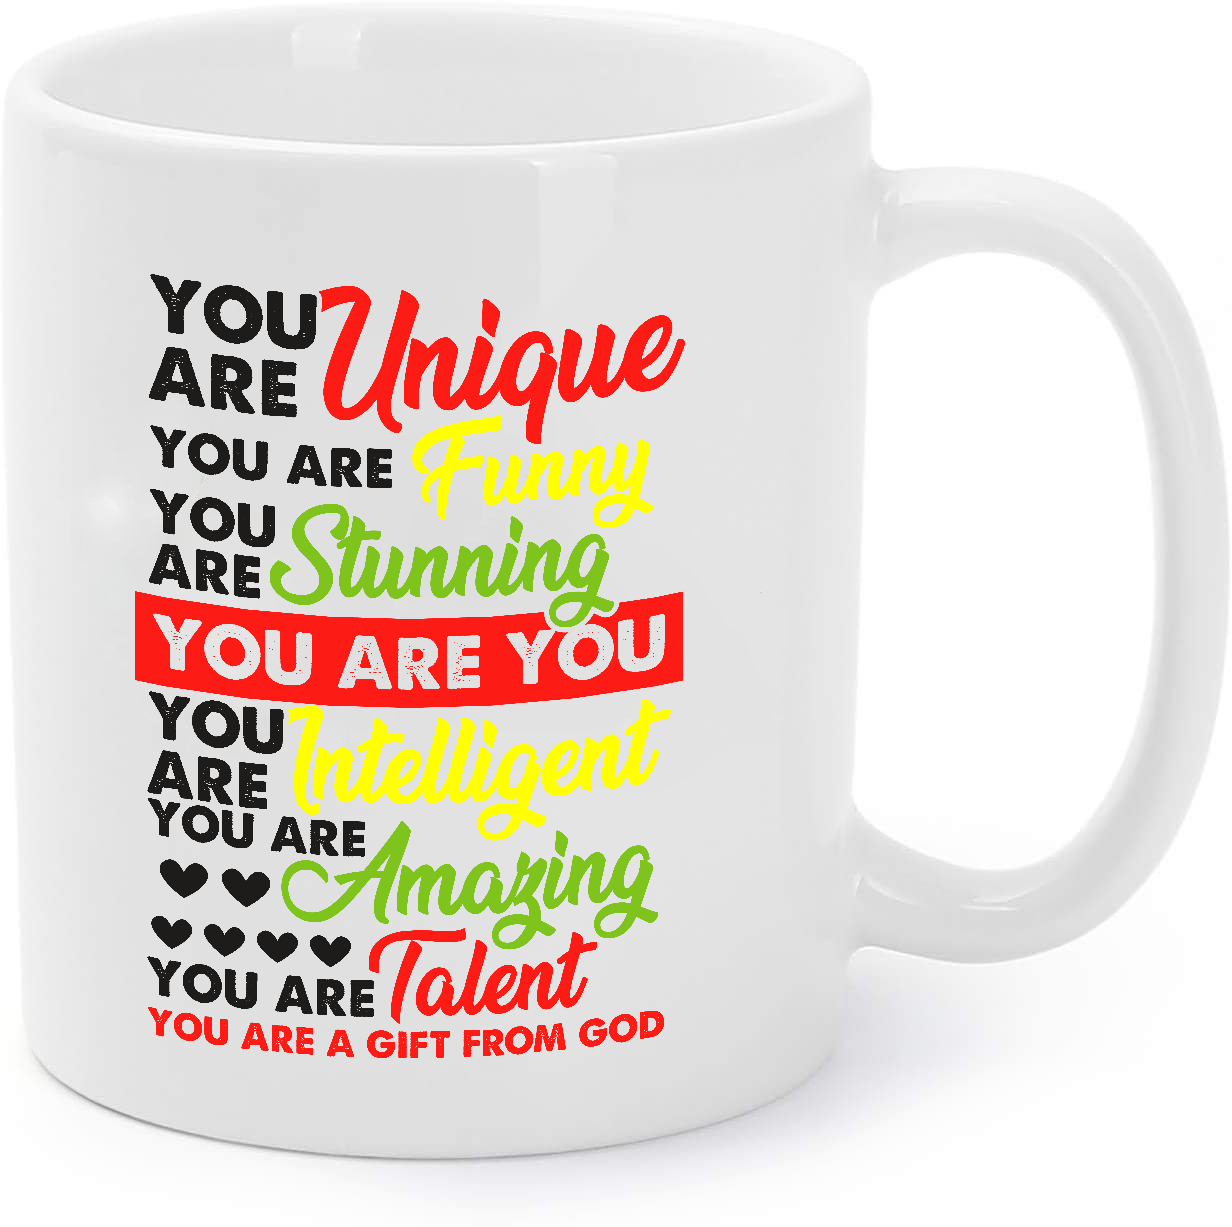 Love Husband And Wife Coffee Mug - You're A Gift From God - $16.95